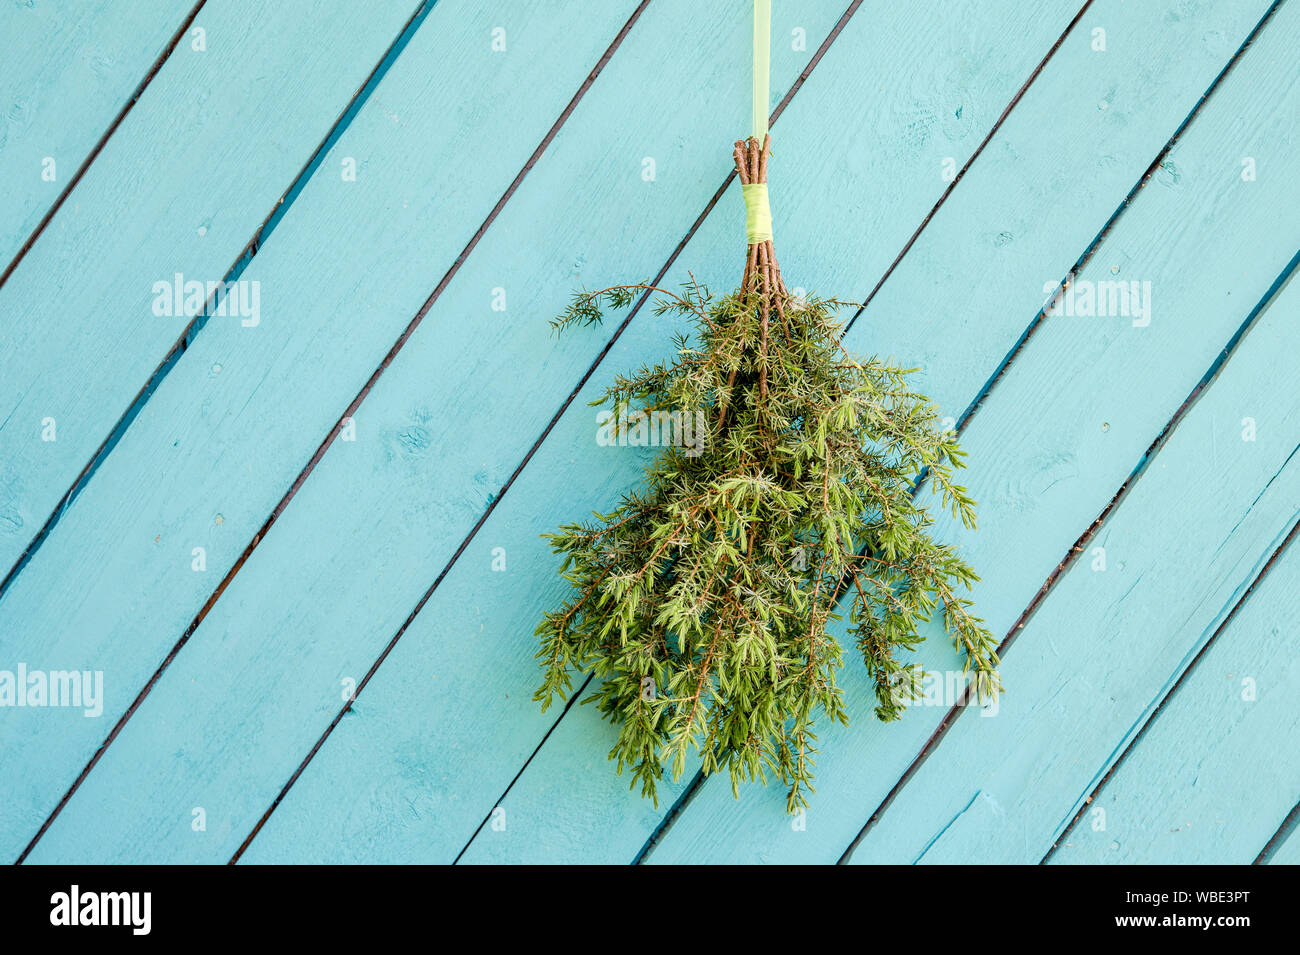 Juniper sauna whisk broom ( also known as vasta, vihta or venik) hanging and drying on the wall, blue wooden background, copy space. Whisk is used in Stock Photo